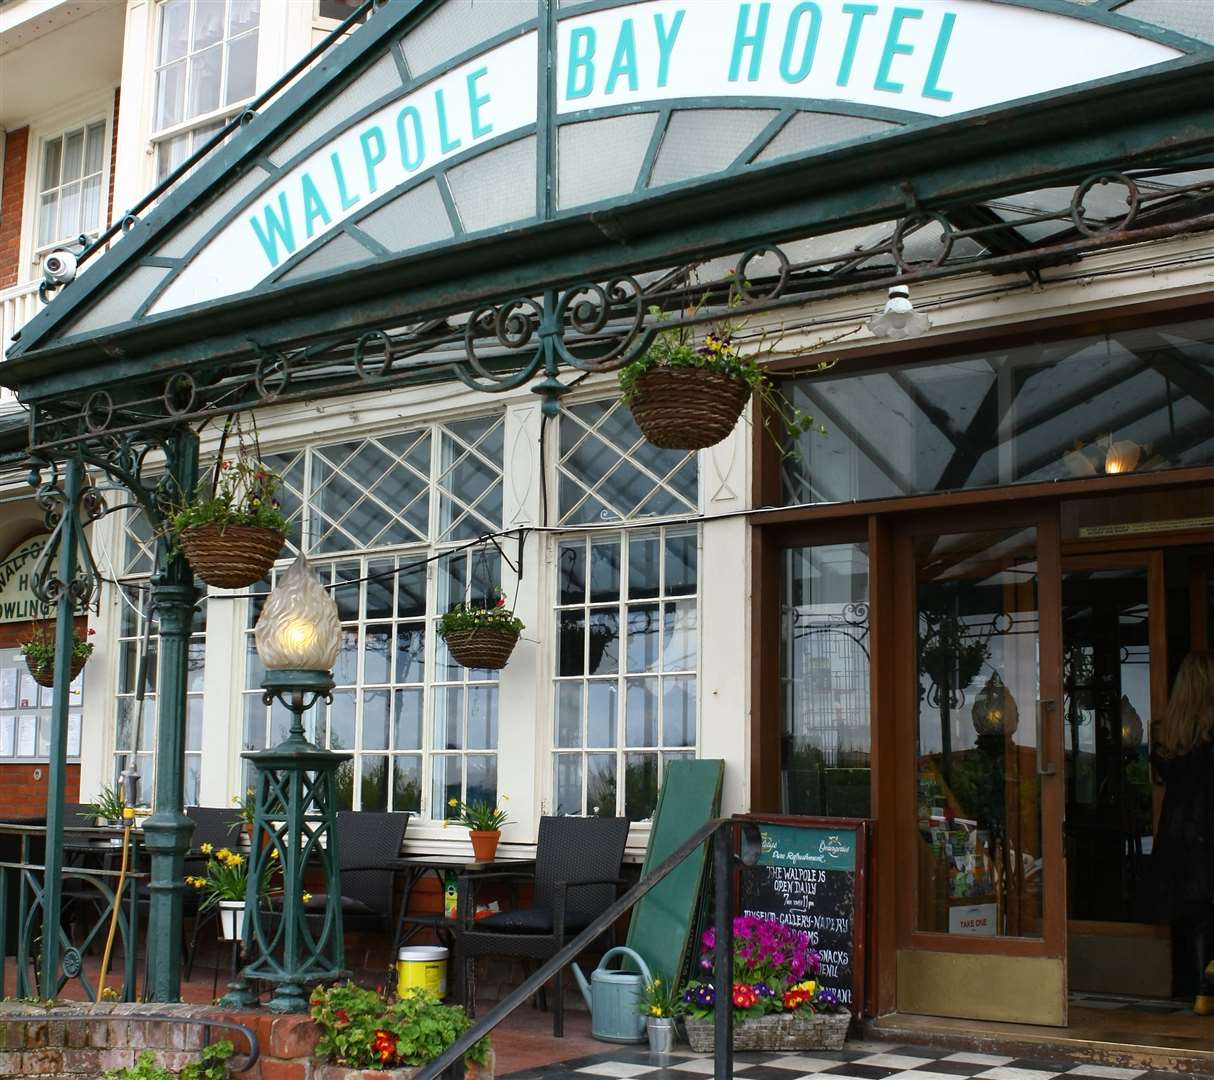 The meeting will be held at the Walpole Bay Hotel in Margate